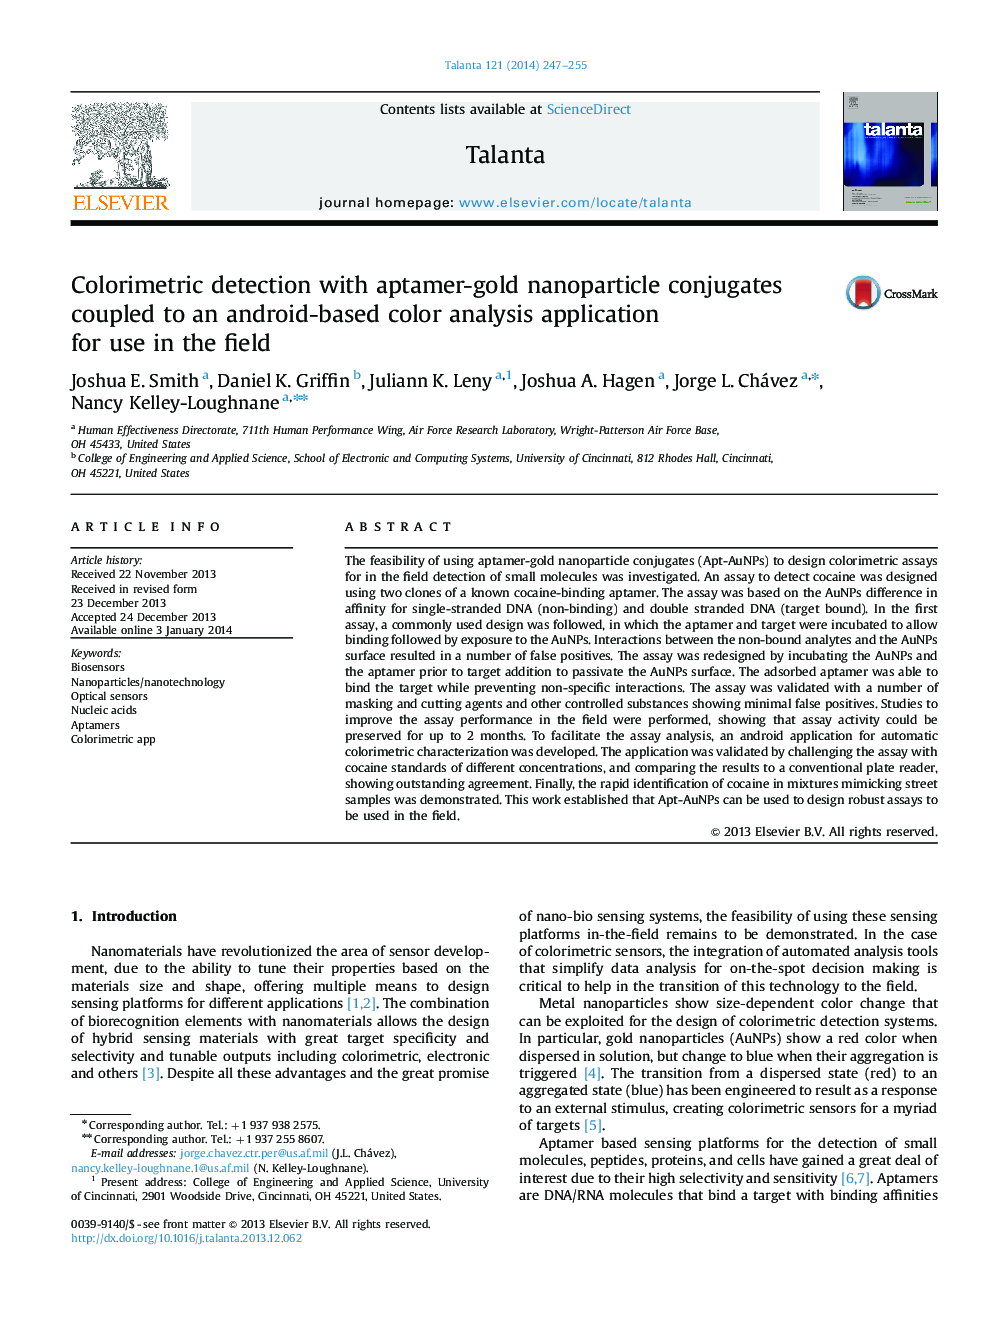 Colorimetric detection with aptamer-gold nanoparticle conjugates coupled to an android-based color analysis application for use in the field